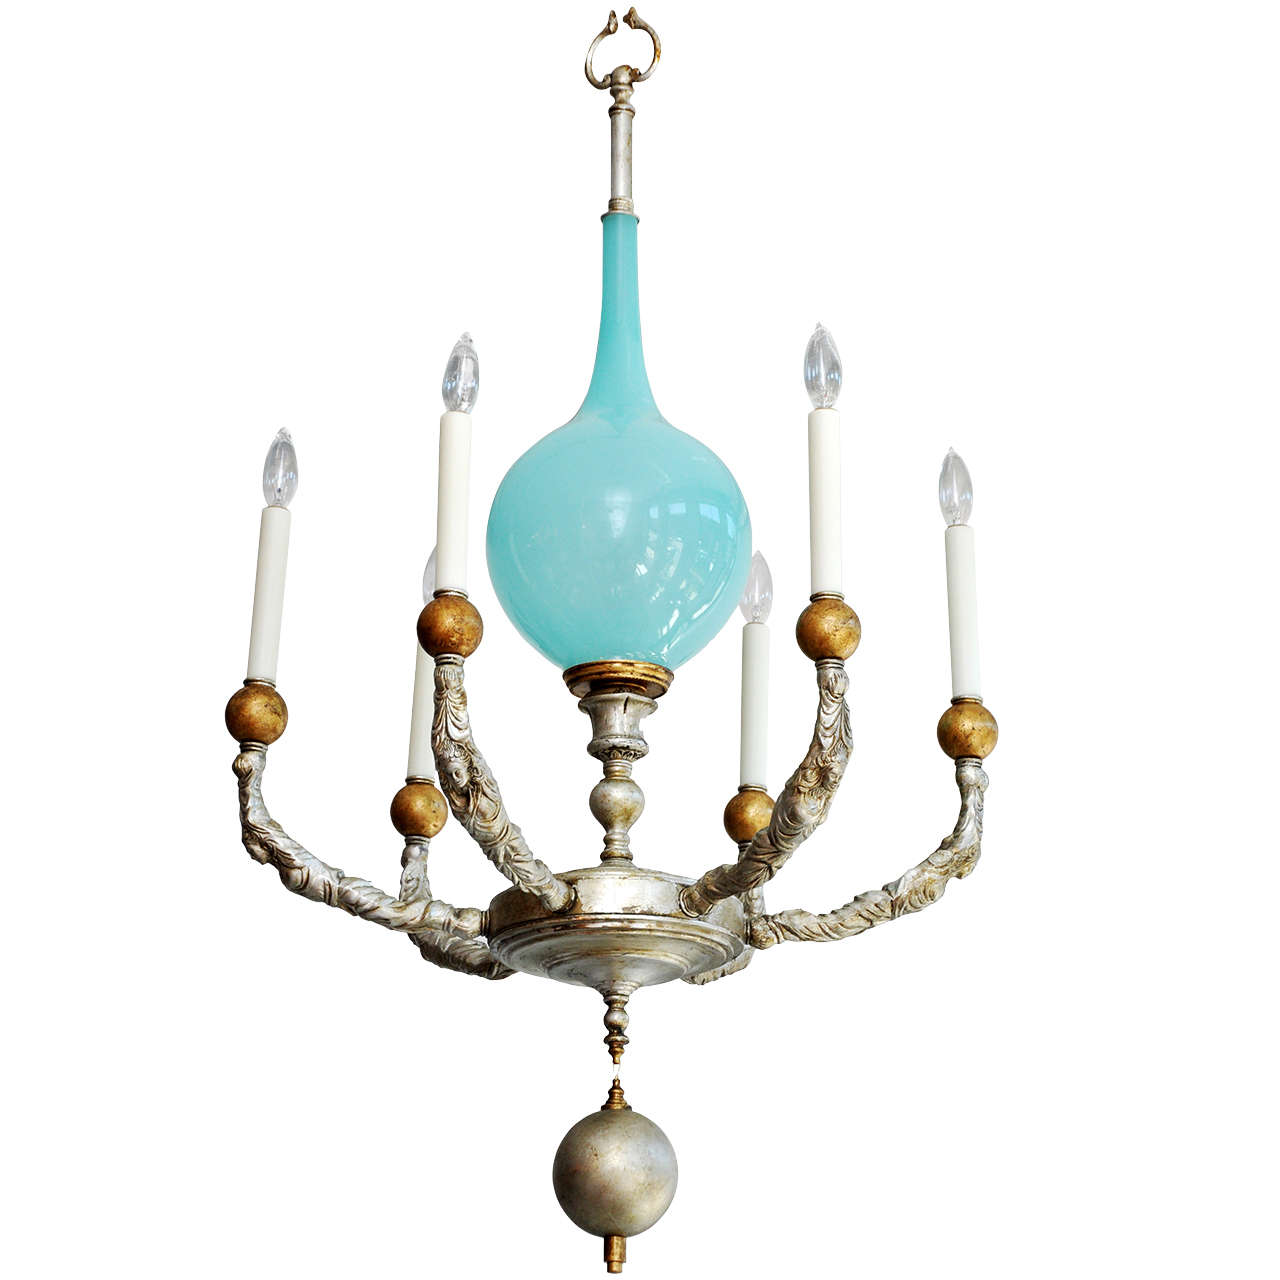 Vintage Blue Murano Glass Chandelier- One of a Kind